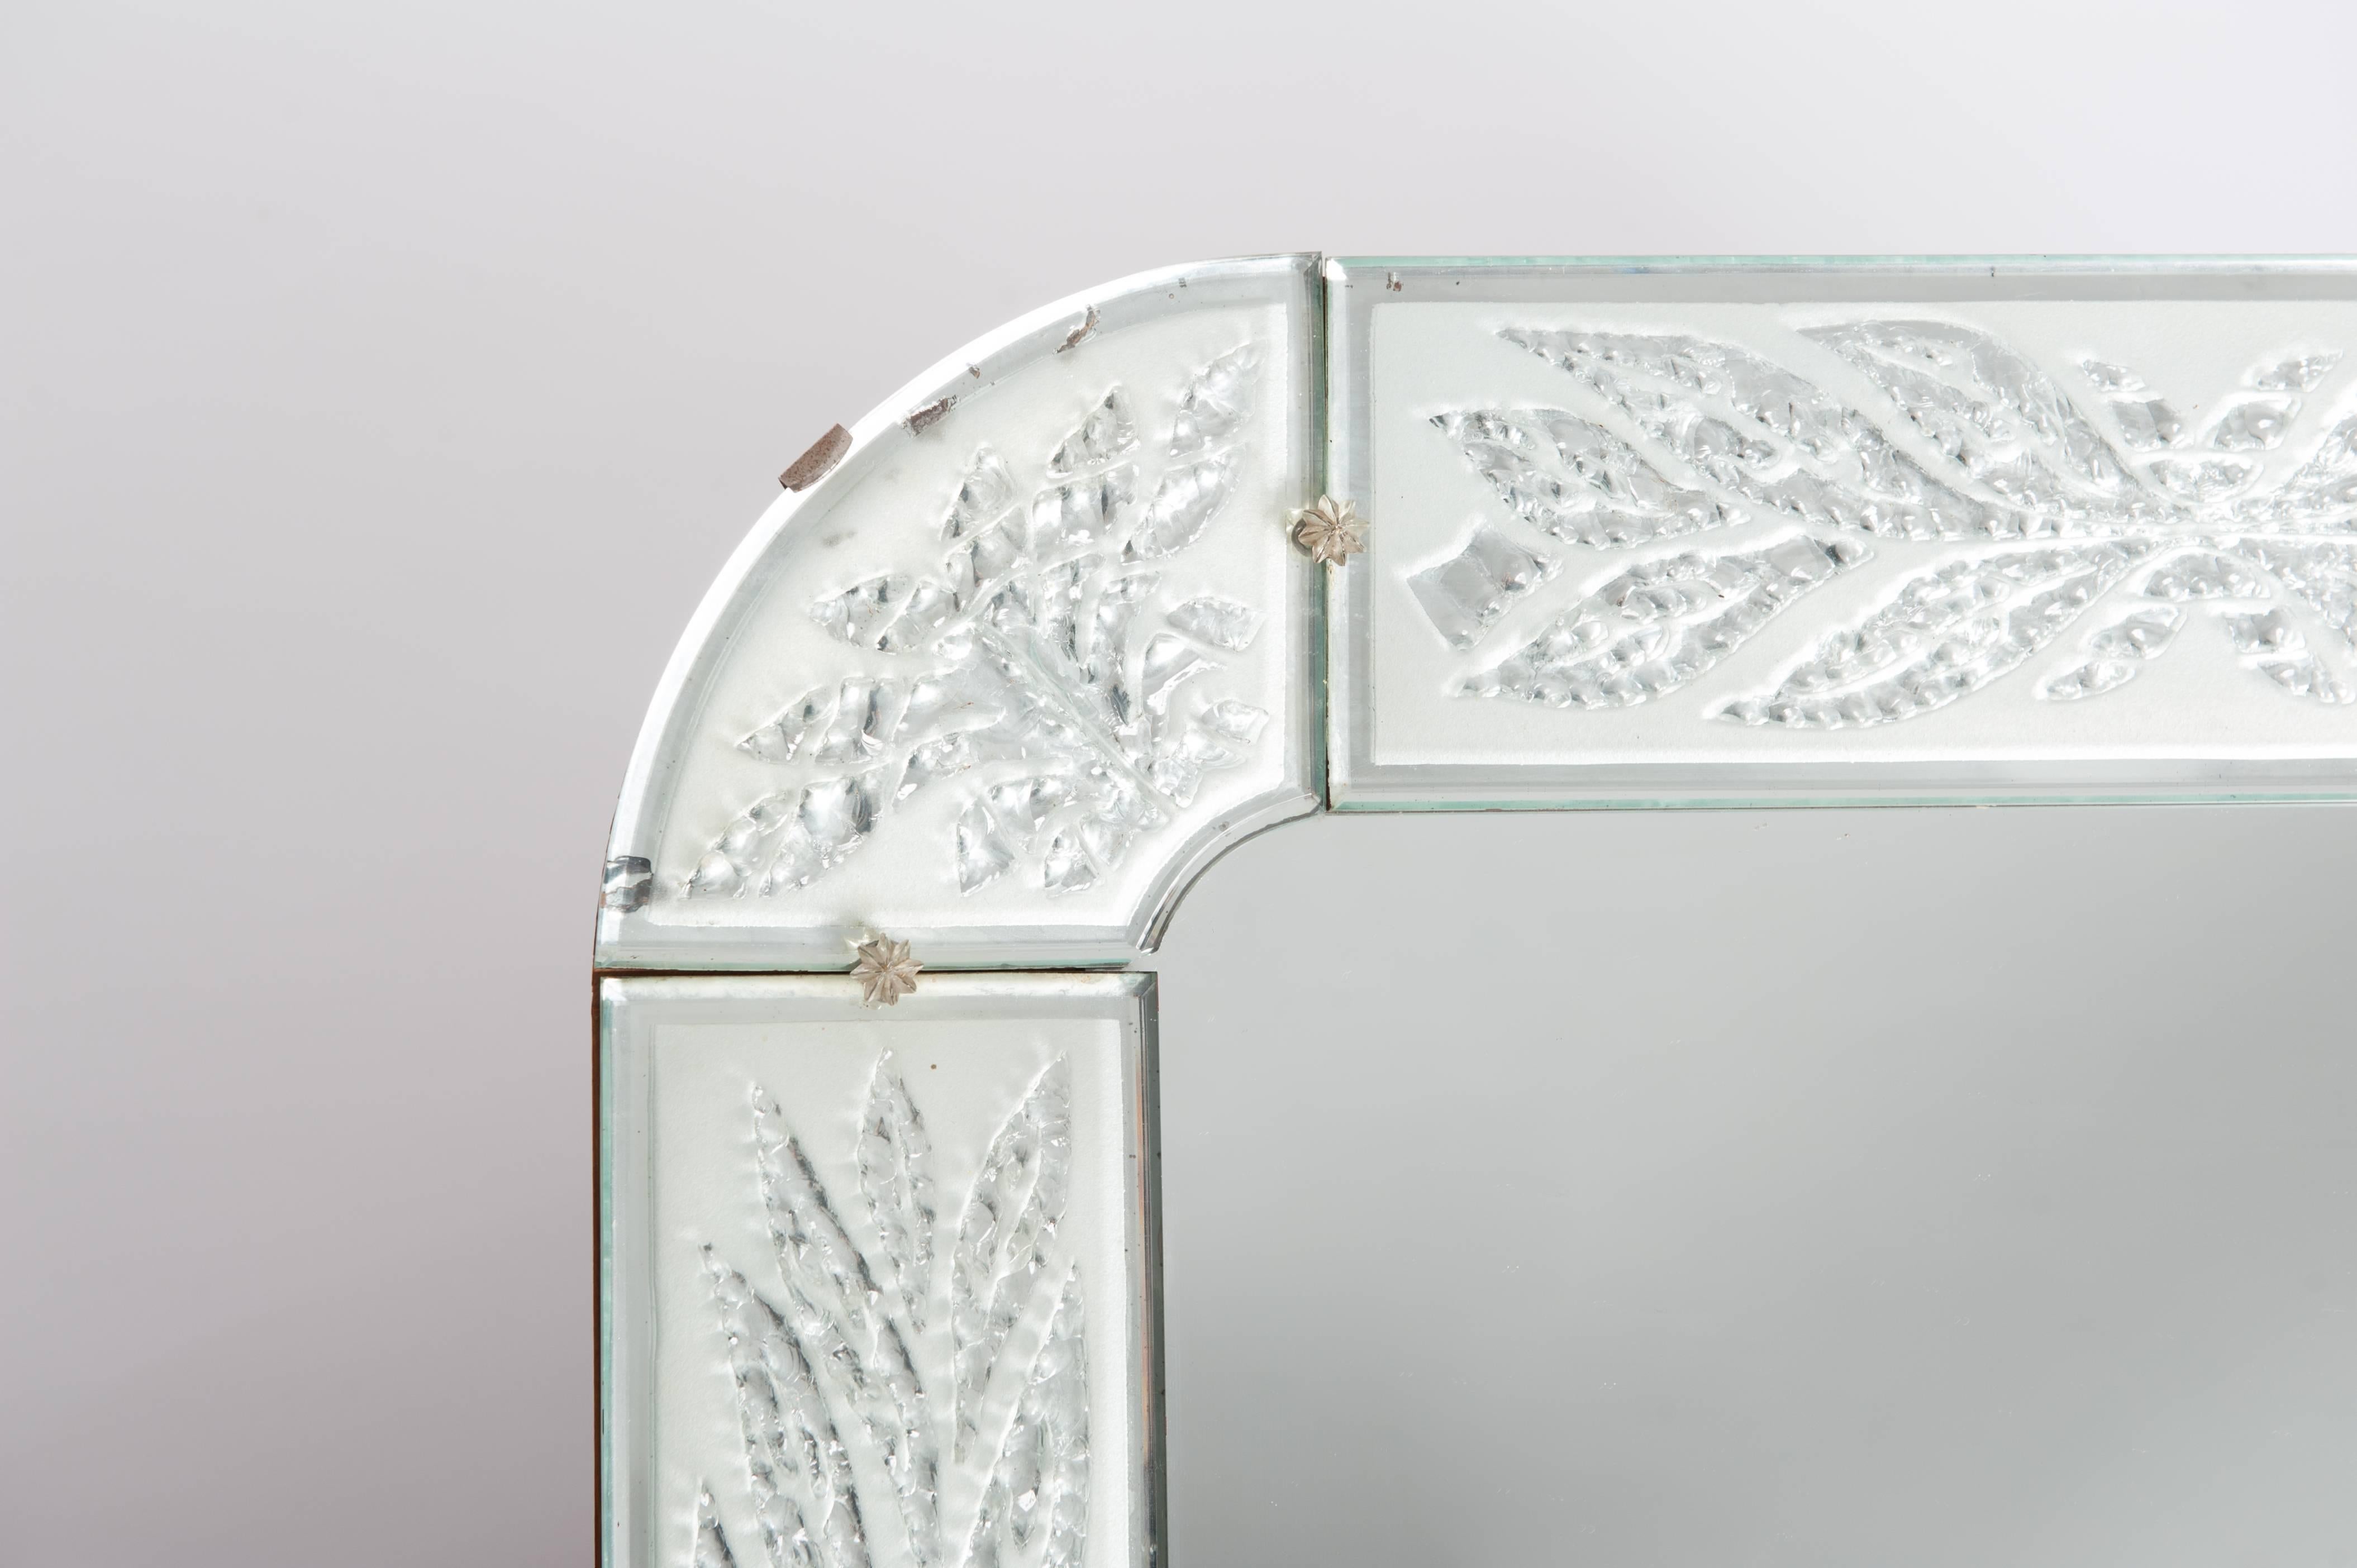 Rare Scandinavian Art Deco mirror designed with sandblasted and clear crystal glass.
The engraving of the frame creates clear elements in the frosted glass that look like frozen stylized leaves.
The sandblasted glass gives the mirror a pastel green